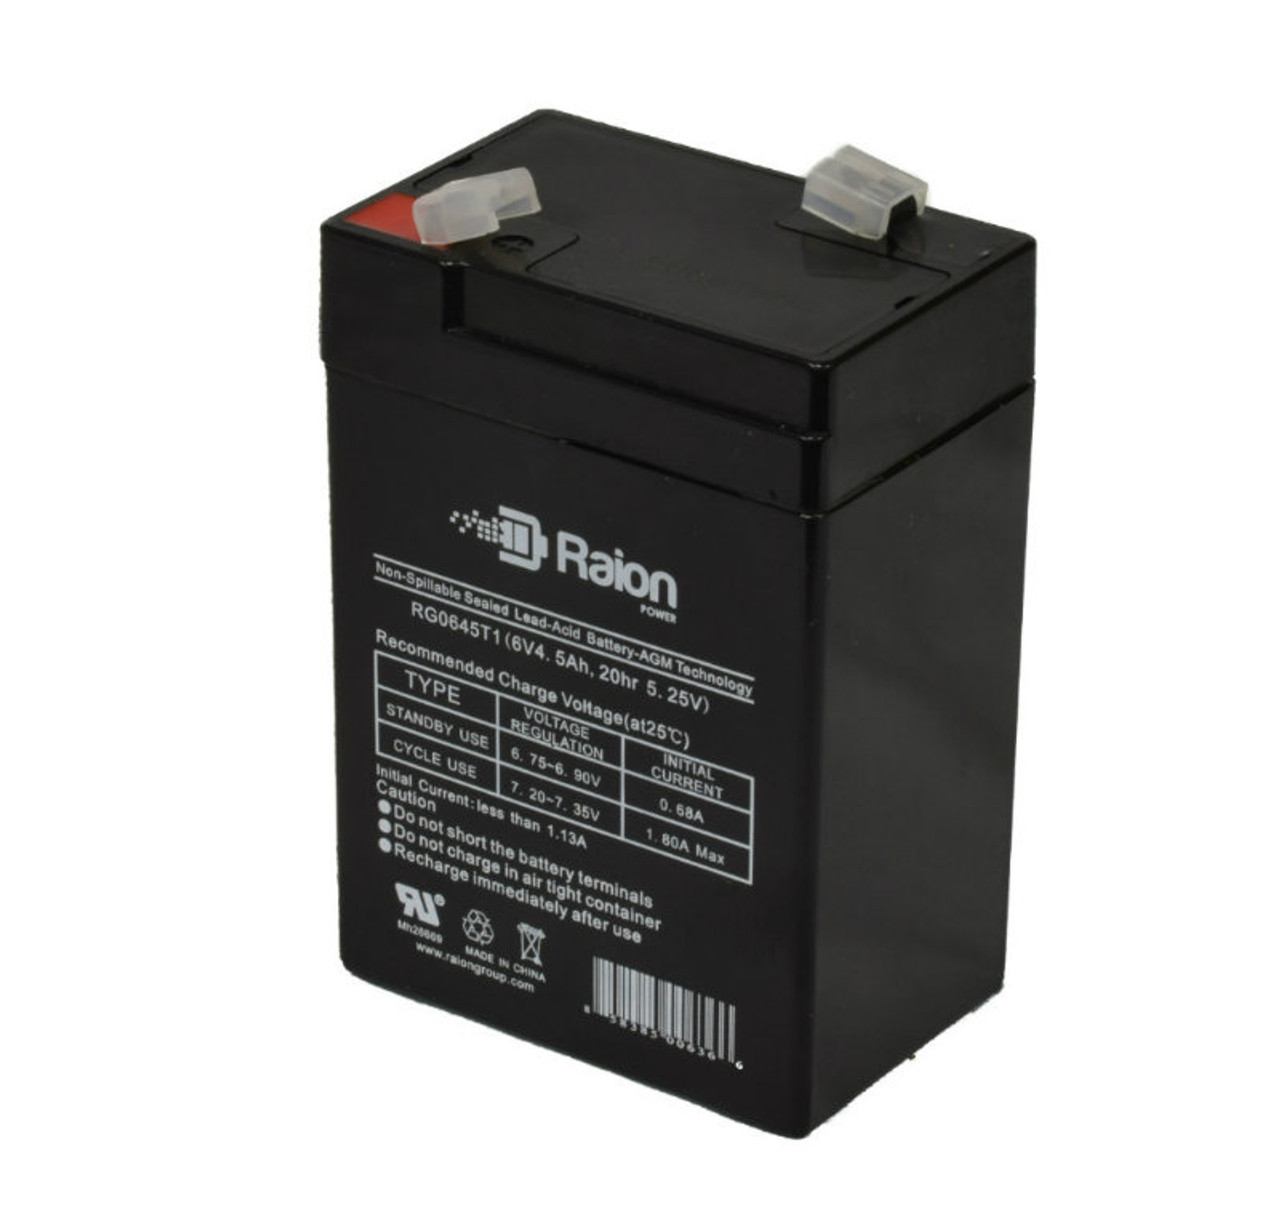 Raion Power RG0645T1 6V 4.5Ah Replacement Battery Cartridge for Power Rite PRB64